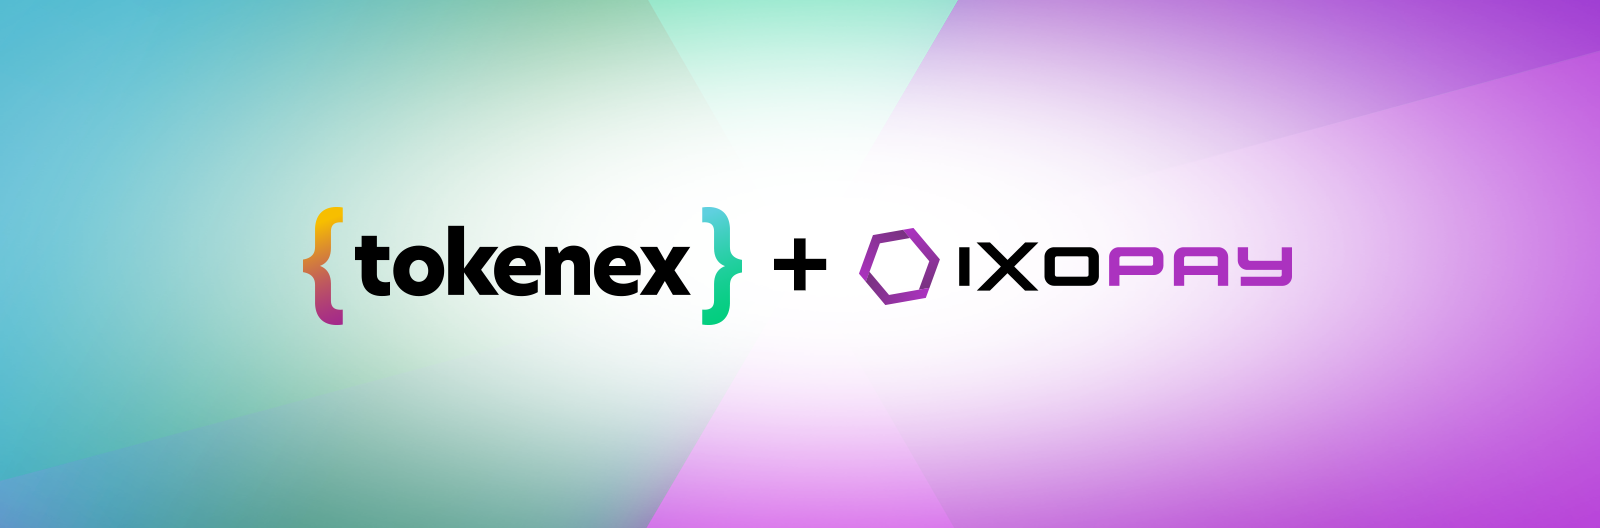 TokenEx and IXOPAY to Merge, Enabling Merchants to Optimize the Use of Multiple Payment Processors thumbnail